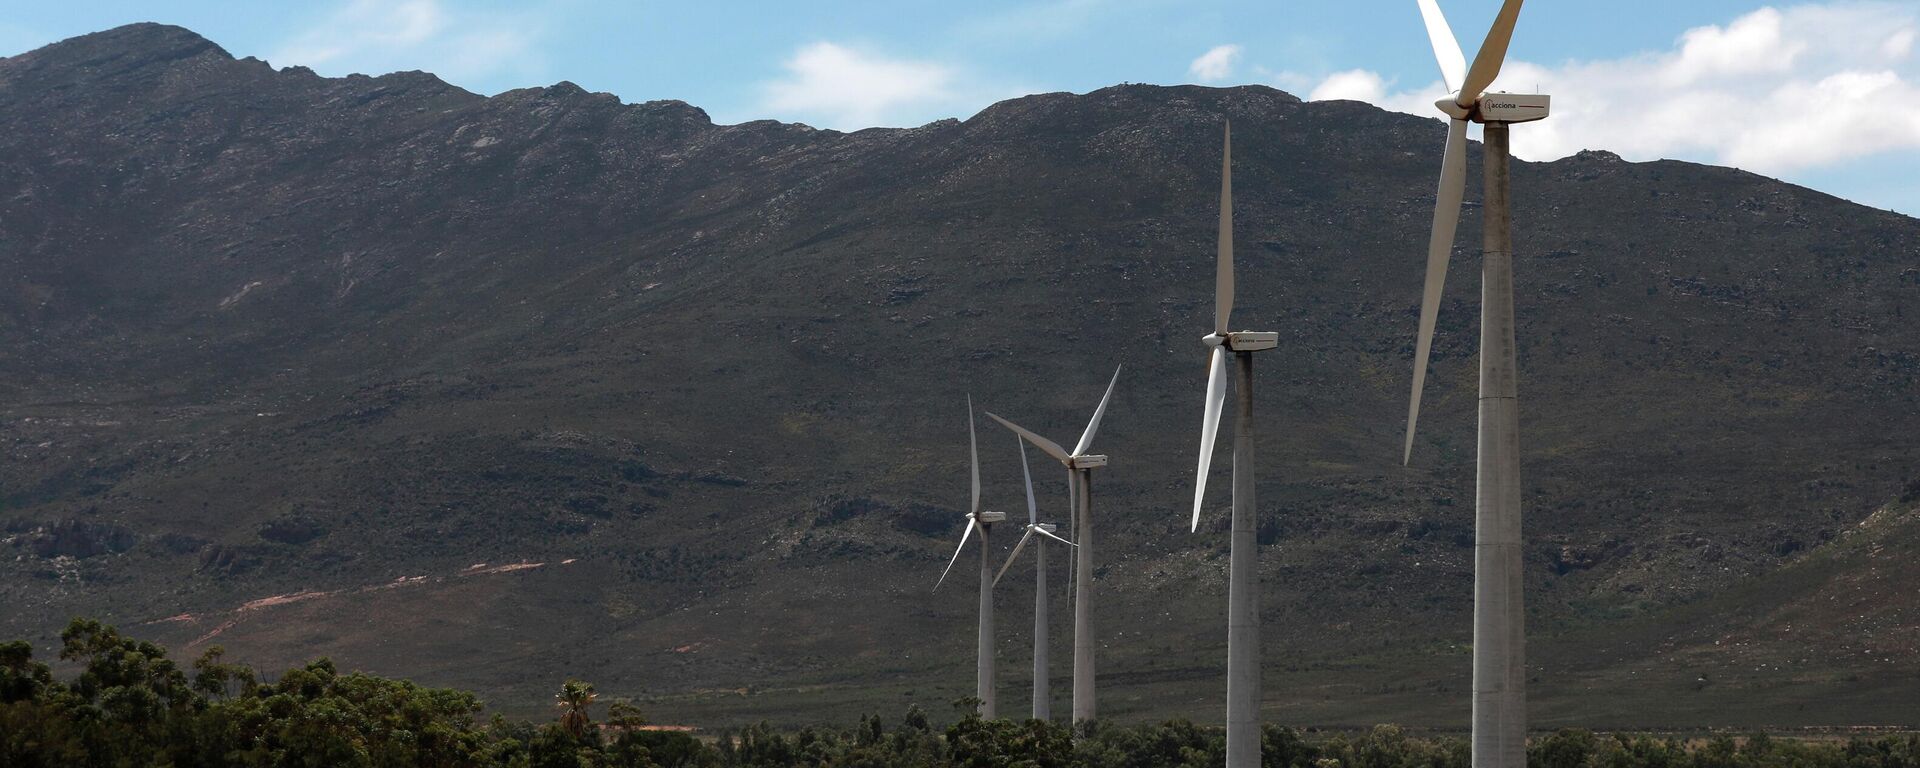 Wind turbines are seen at the Gouda Wind Farm located 115 km north east of Cape Town, South Africa, Monday, Nov. 7, 2022. The wind farm is one of the biggest in Southern Africa. - Sputnik International, 1920, 08.11.2022